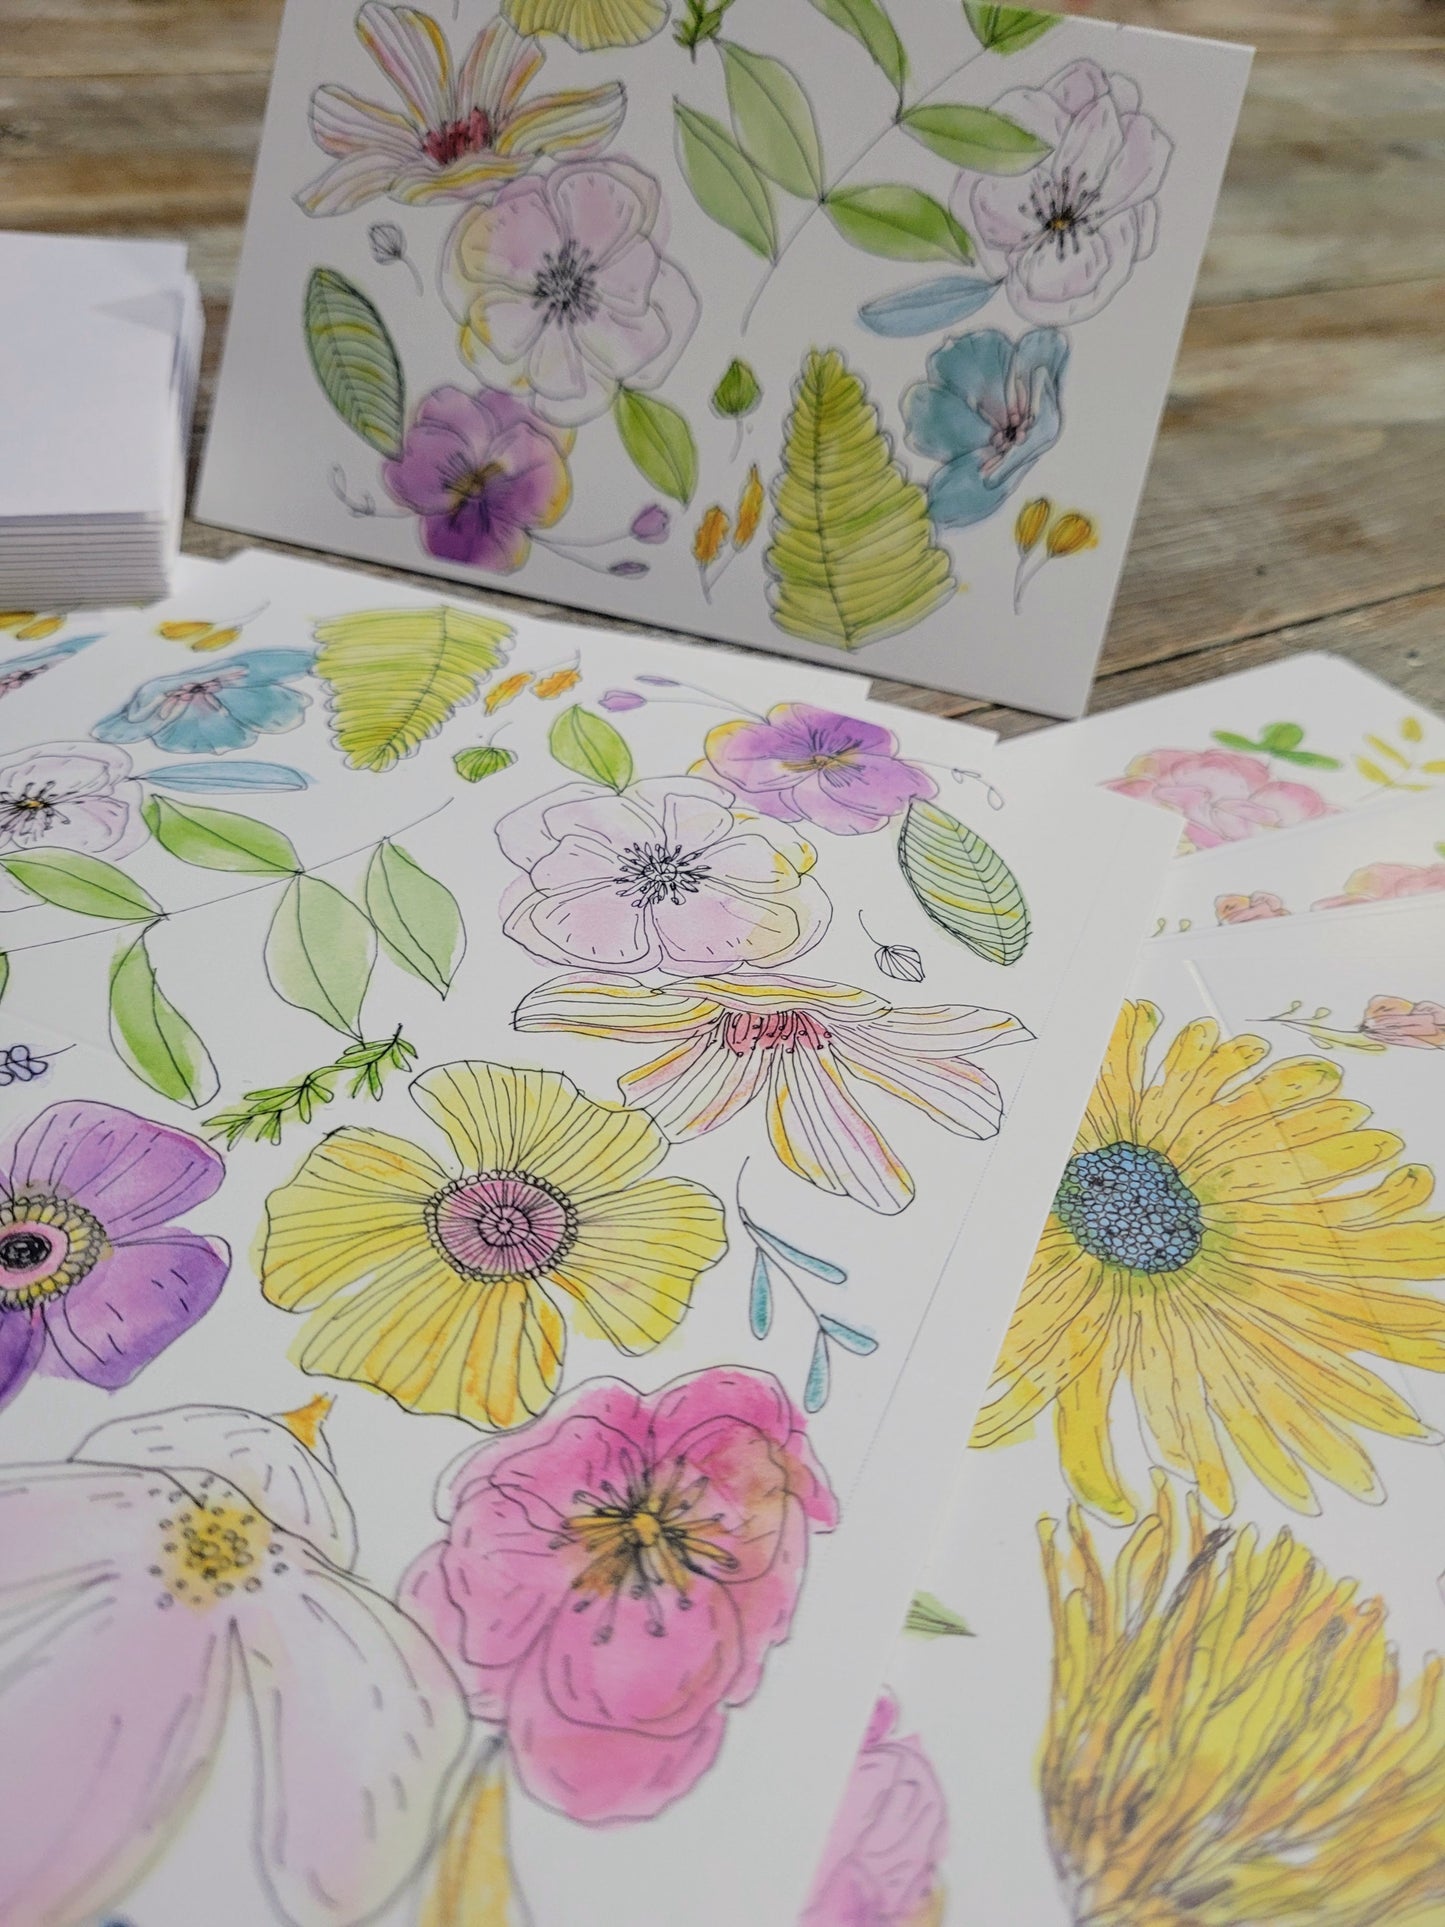 6 Floral Cards / *Free shipping* / frameable greeting card / envelopes snail mail / blank inside / watercolor / gift set / whimisical / notepad / bookmark set